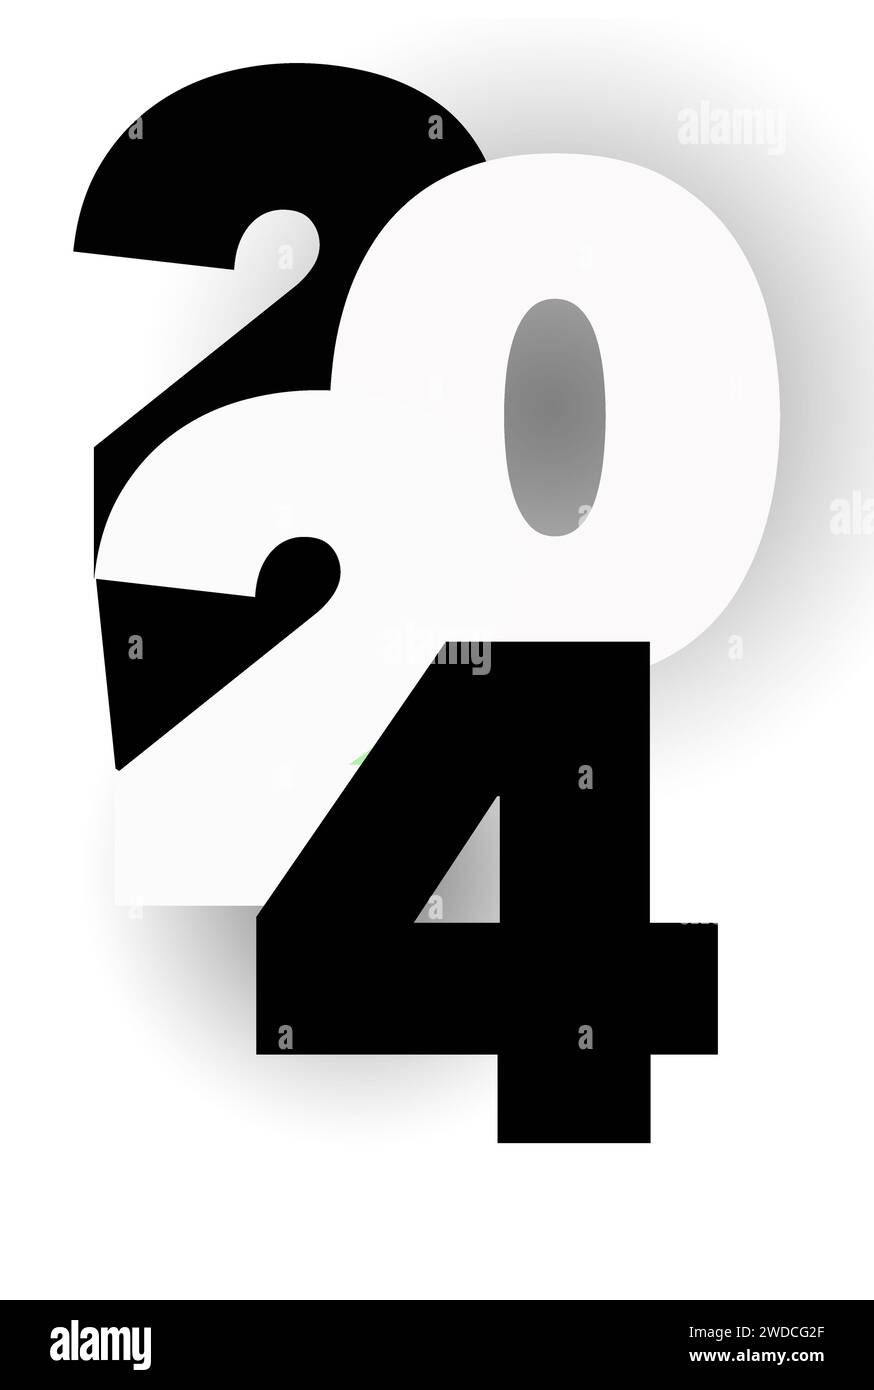 The number 2024 is seen in a graphic presentation. Stock Photo